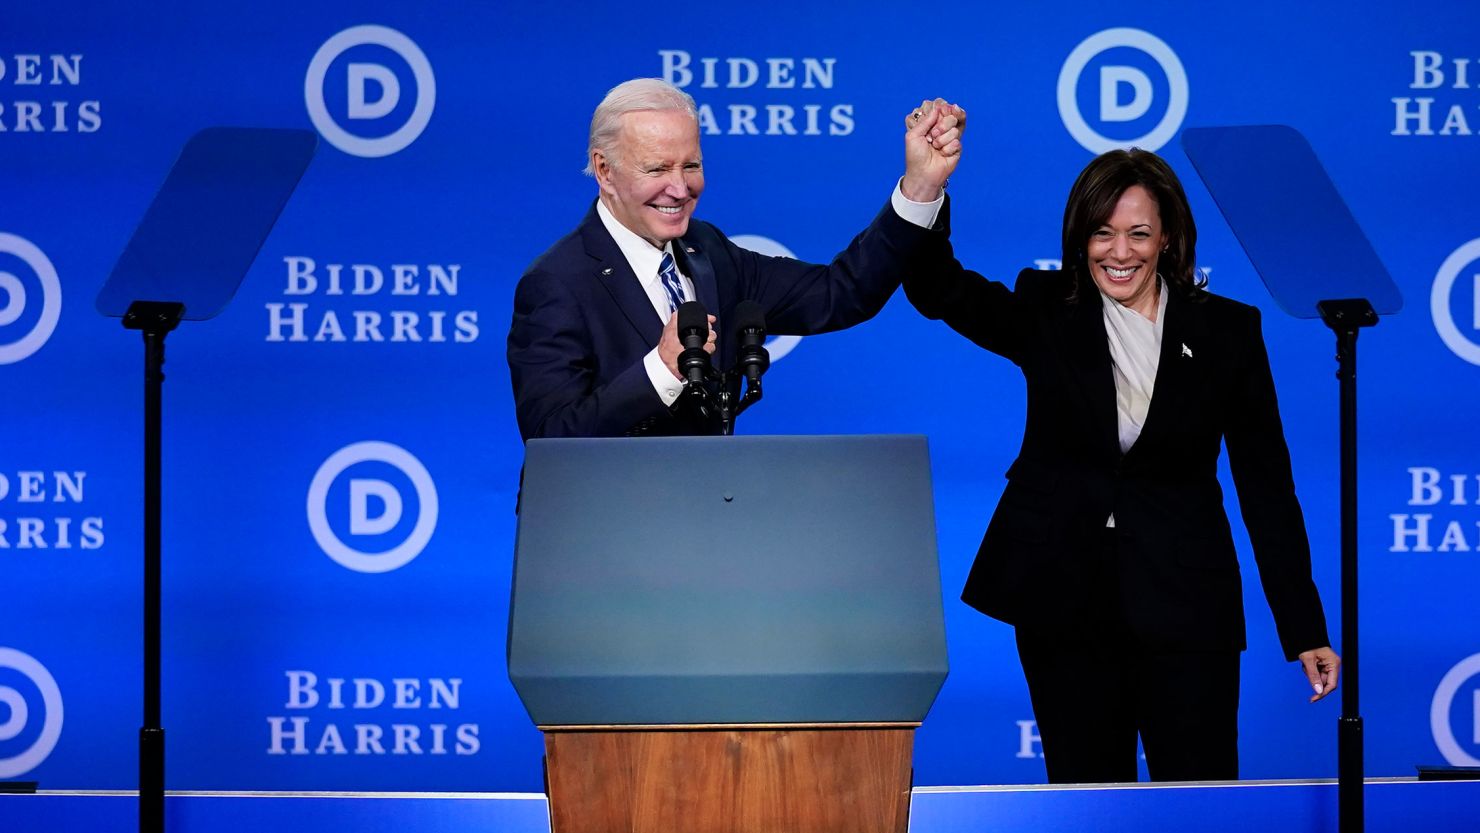 President Joe Biden and Vice President Kamala Harris hold their hands up at the Democratic National Committee winter meeting, February 3, 2023, in Philadelphia.